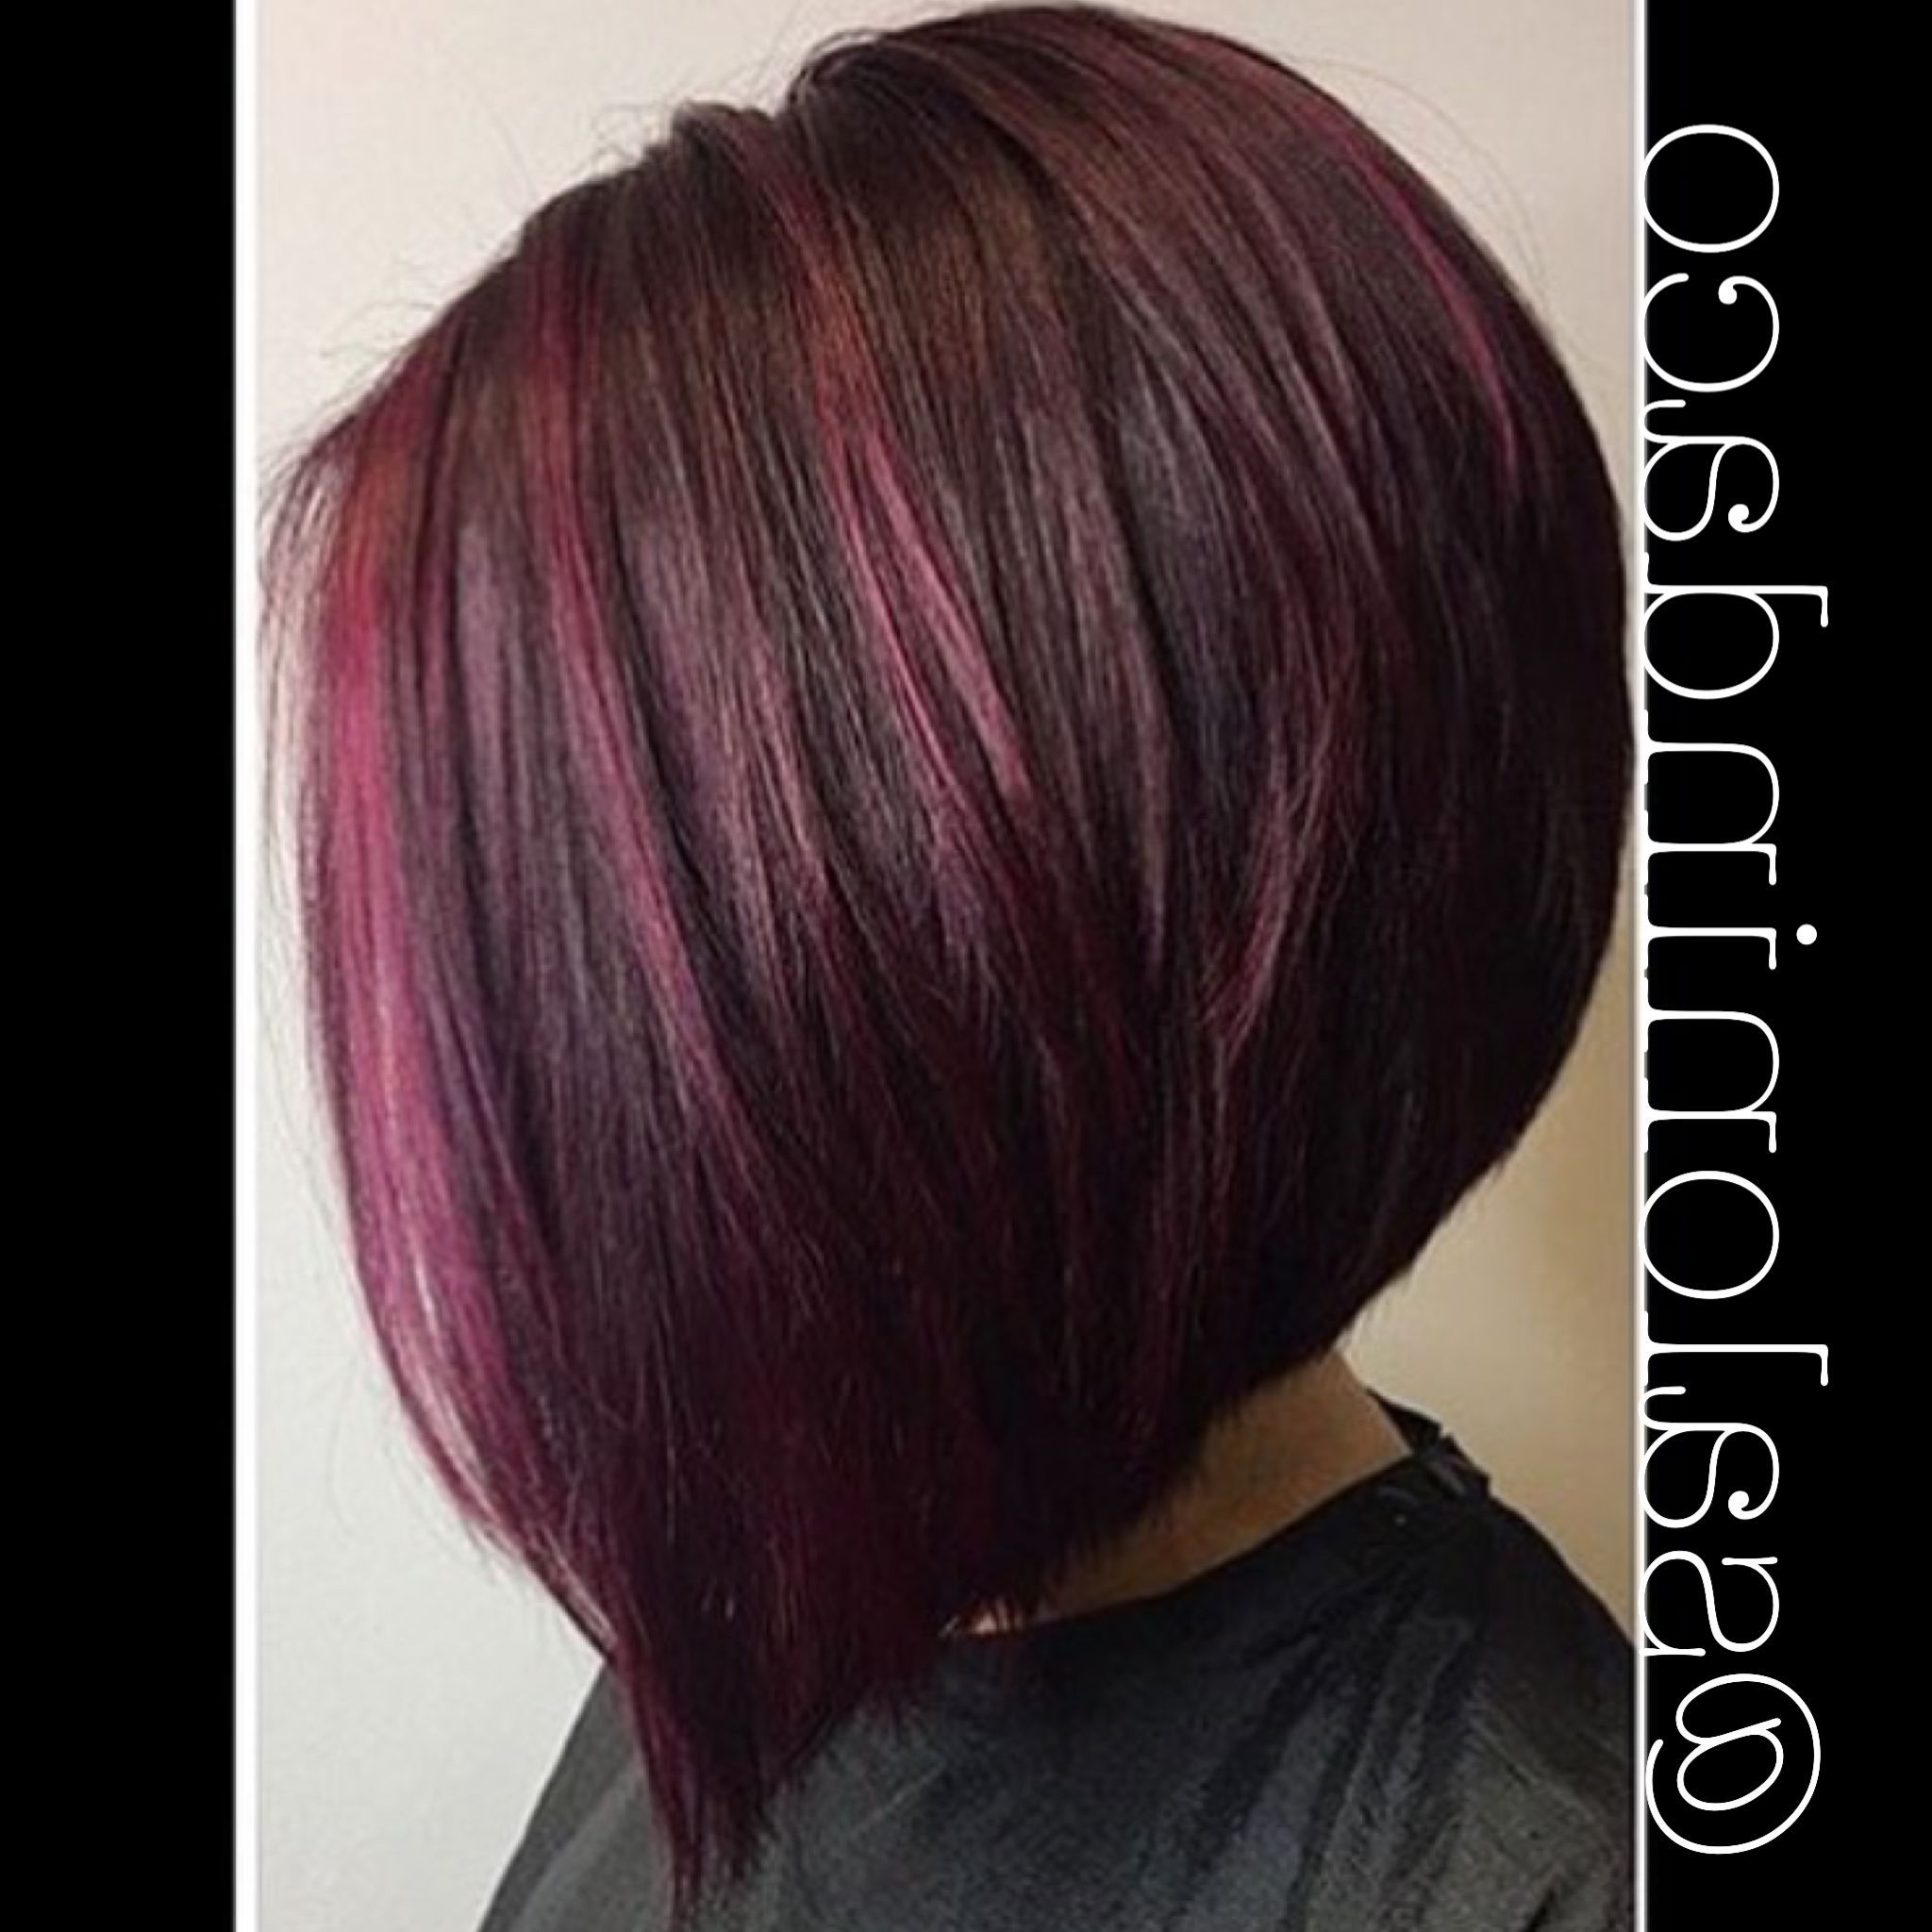 Asymmetrical Swing Bob Hairstyle Fall Inspo Magenta Colour Cranberry  Burgundy Balayage Hair Color | Swing Bob Hairstyles, Bob Hairstyles, Bob  Hair Color Inside Most Current Inverted Magenta Lob Haircuts (View 5 of 25)